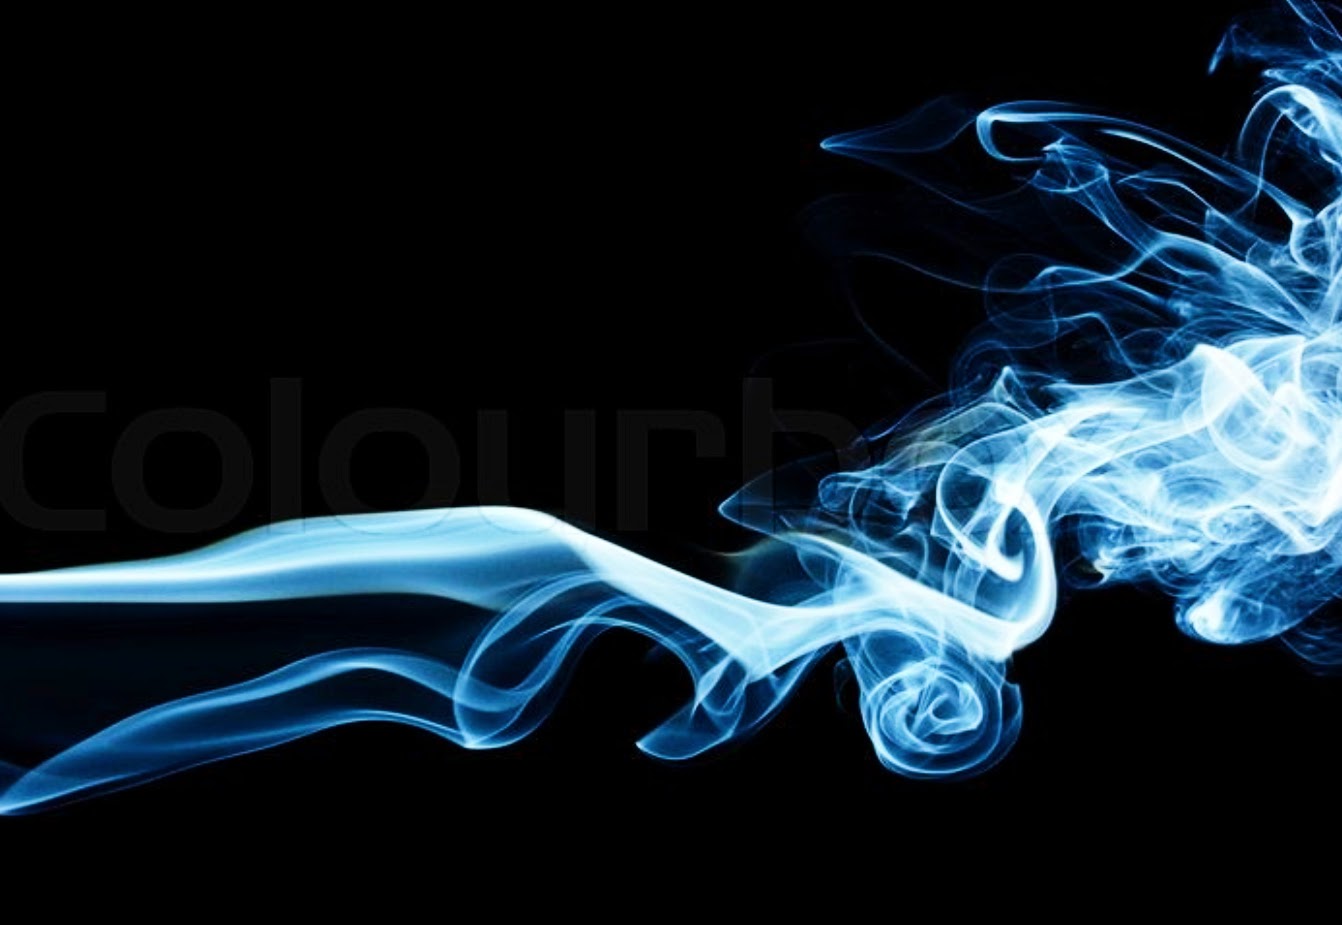 Blue smoke, it is time for spies to disappear